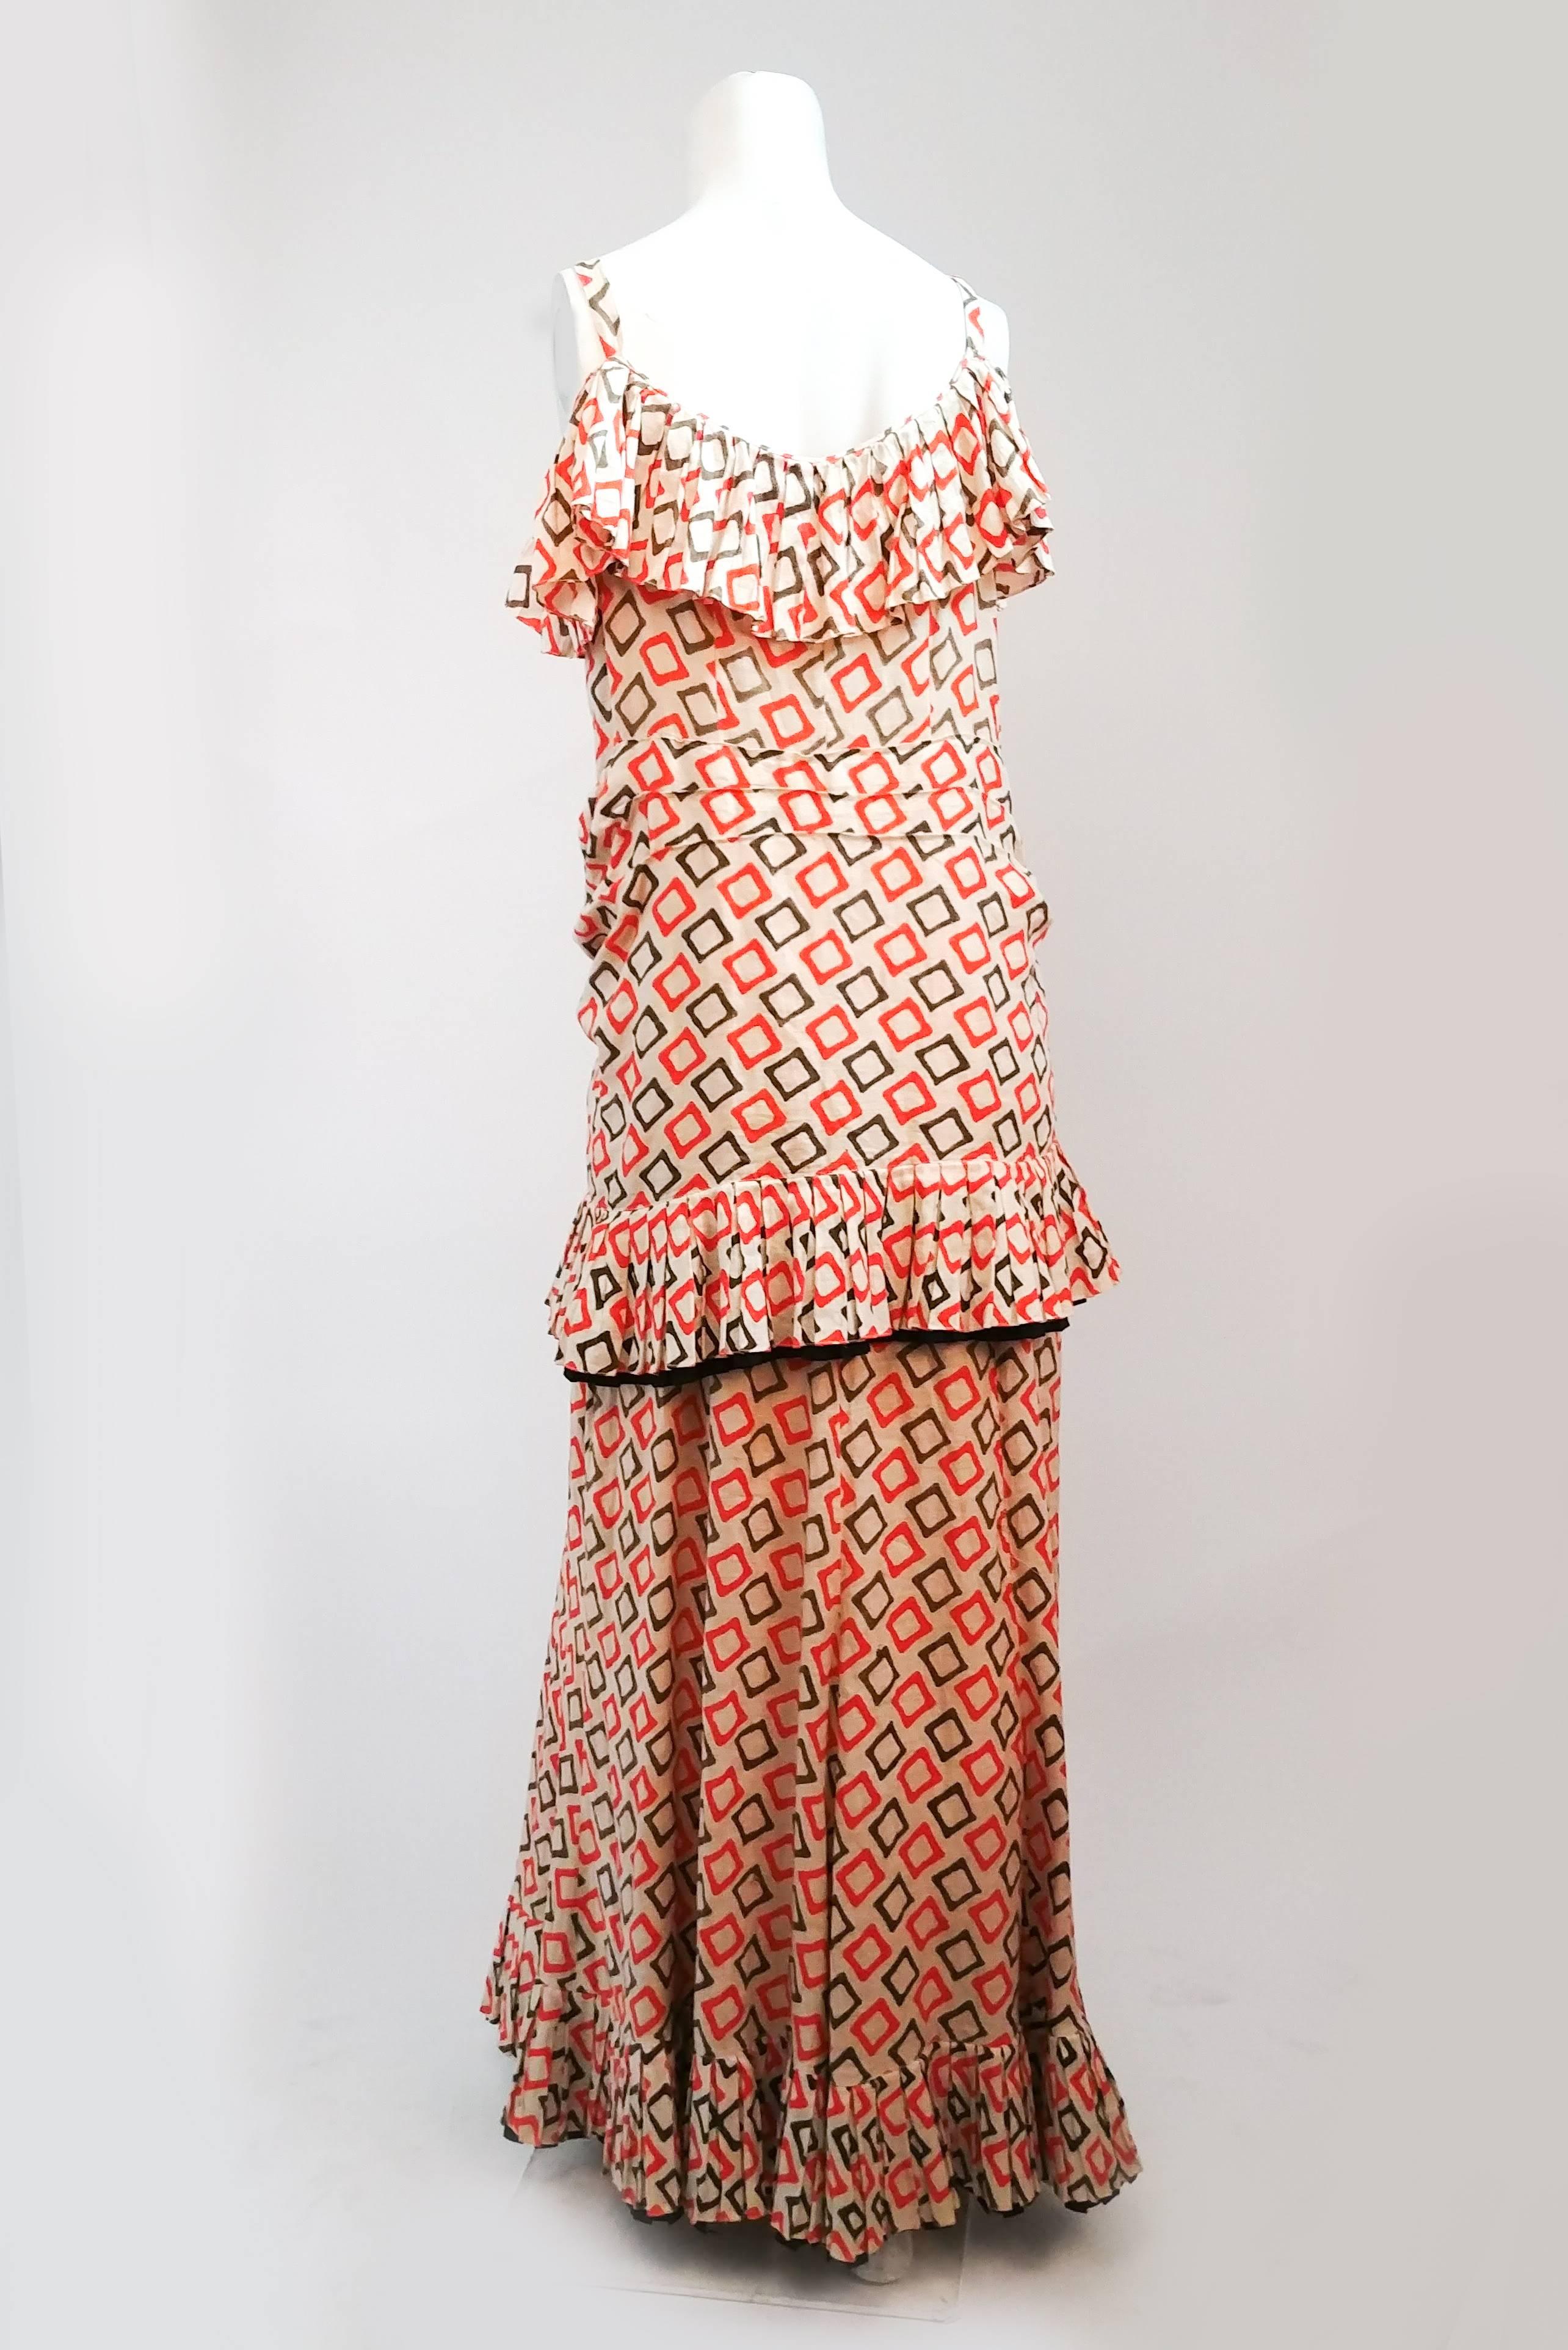 1930s Geometric Printed Cotton Dress In Good Condition For Sale In San Francisco, CA